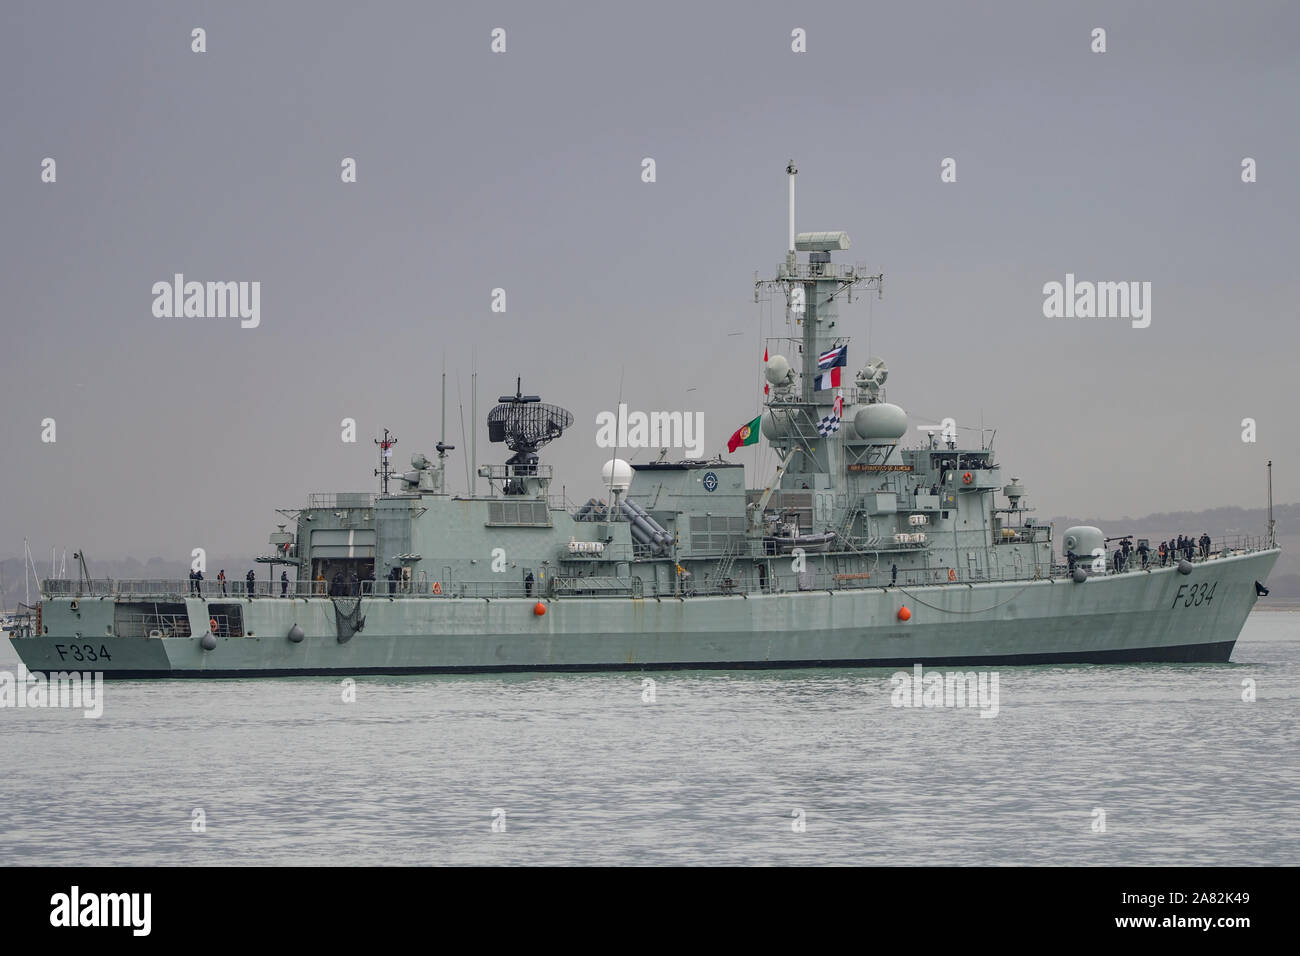 The Portuguese Navy frigate NRP D. Francisco de Almeida (F334) seen on arrival in Portsmouth Harbour, UK on the 4th November 2019. Stock Photo